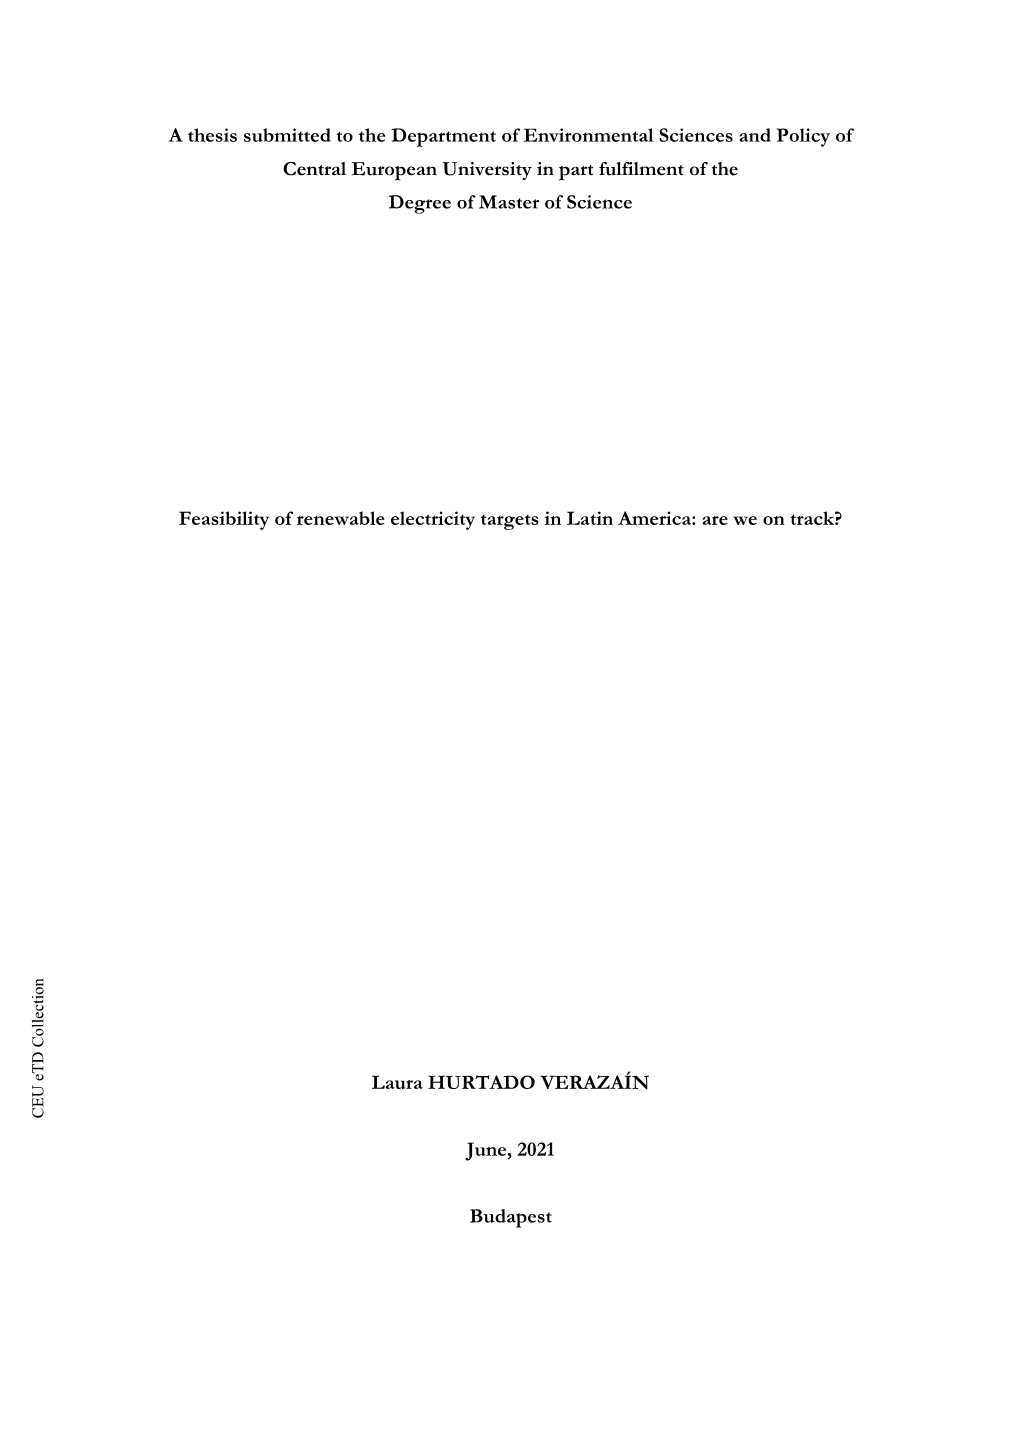 A Thesis Submitted to the Department of Environmental Sciences and Policy of Central European University in Part Fulfilment of the Degree of Master of Science